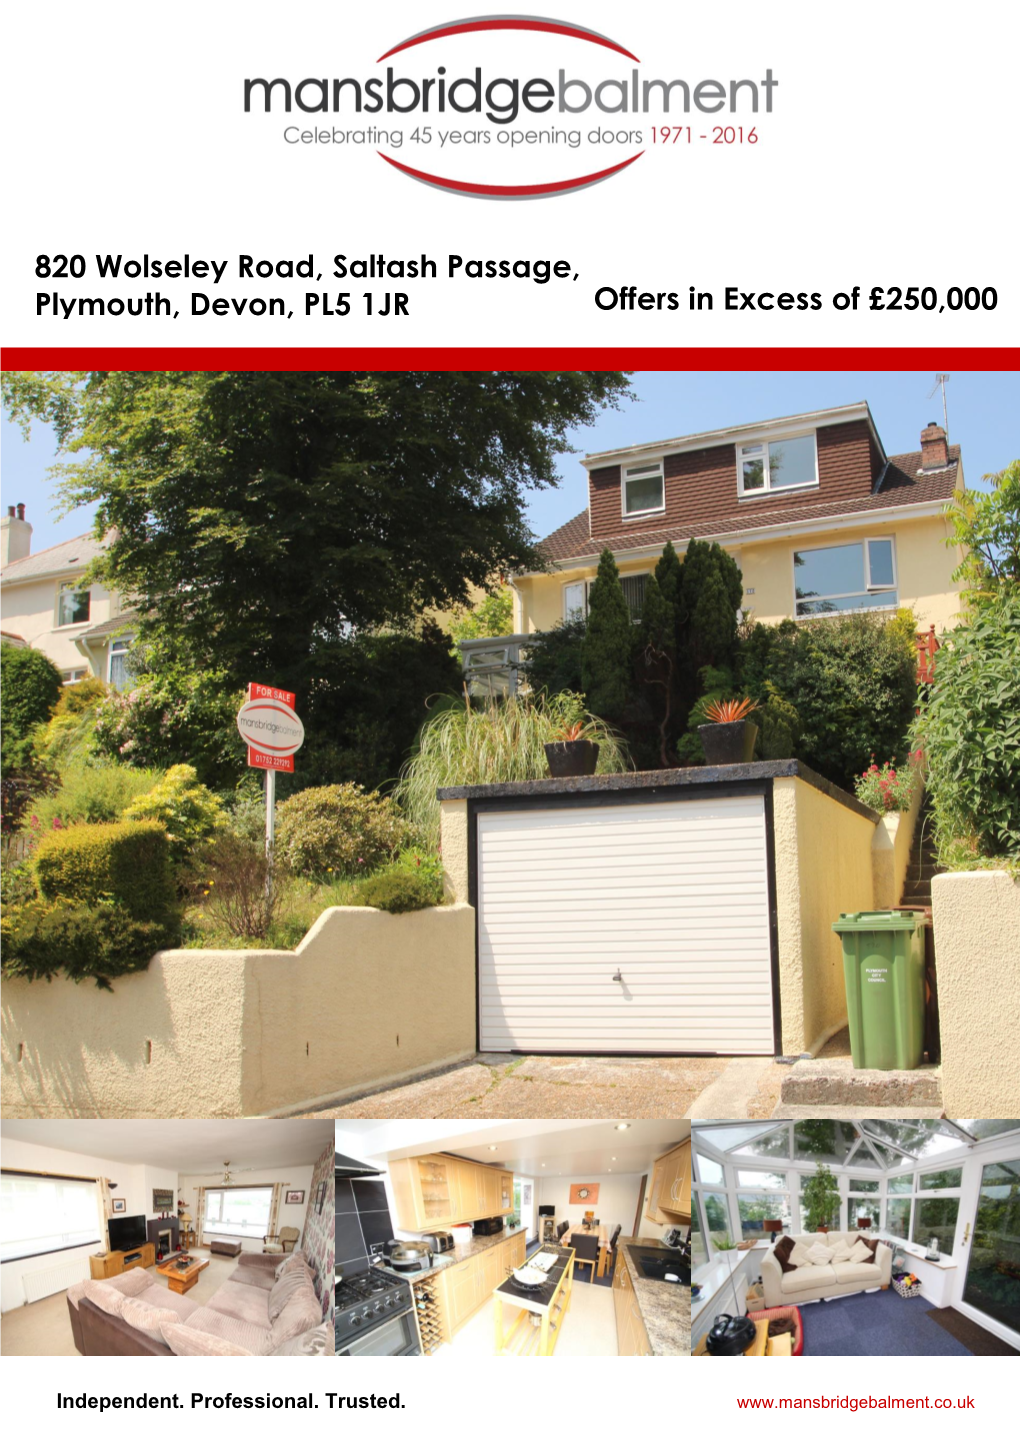 820 Wolseley Road, Saltash Passage, Plymouth, Devon, PL5 1JR Offers in Excess of £250,000